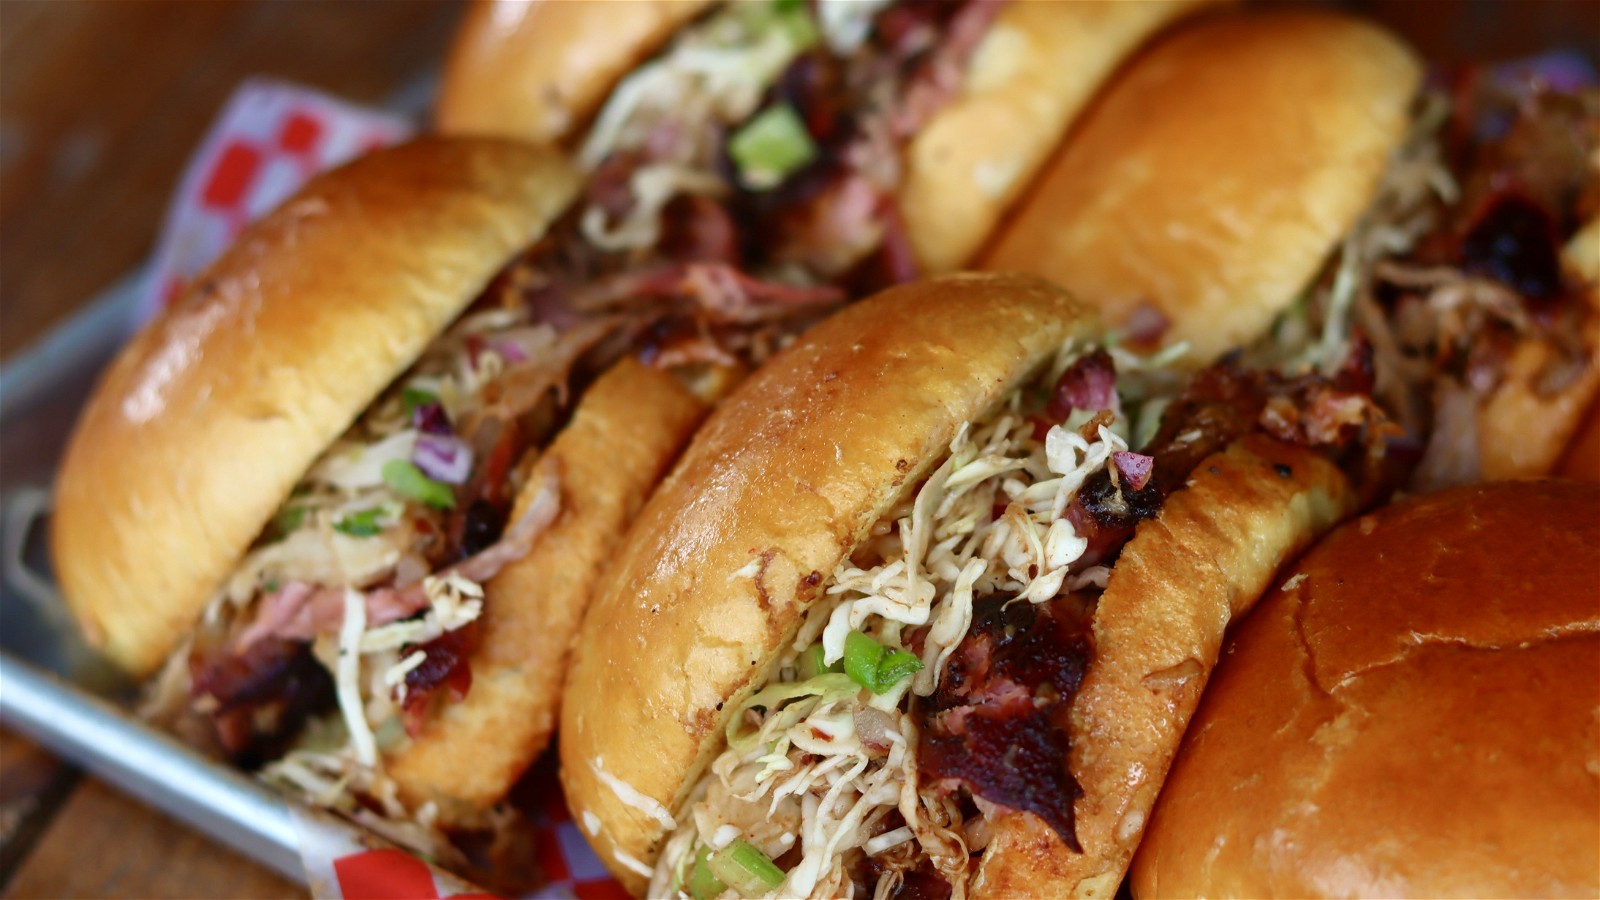 Image of Smoked Pulled Pork Sliders with Slaw